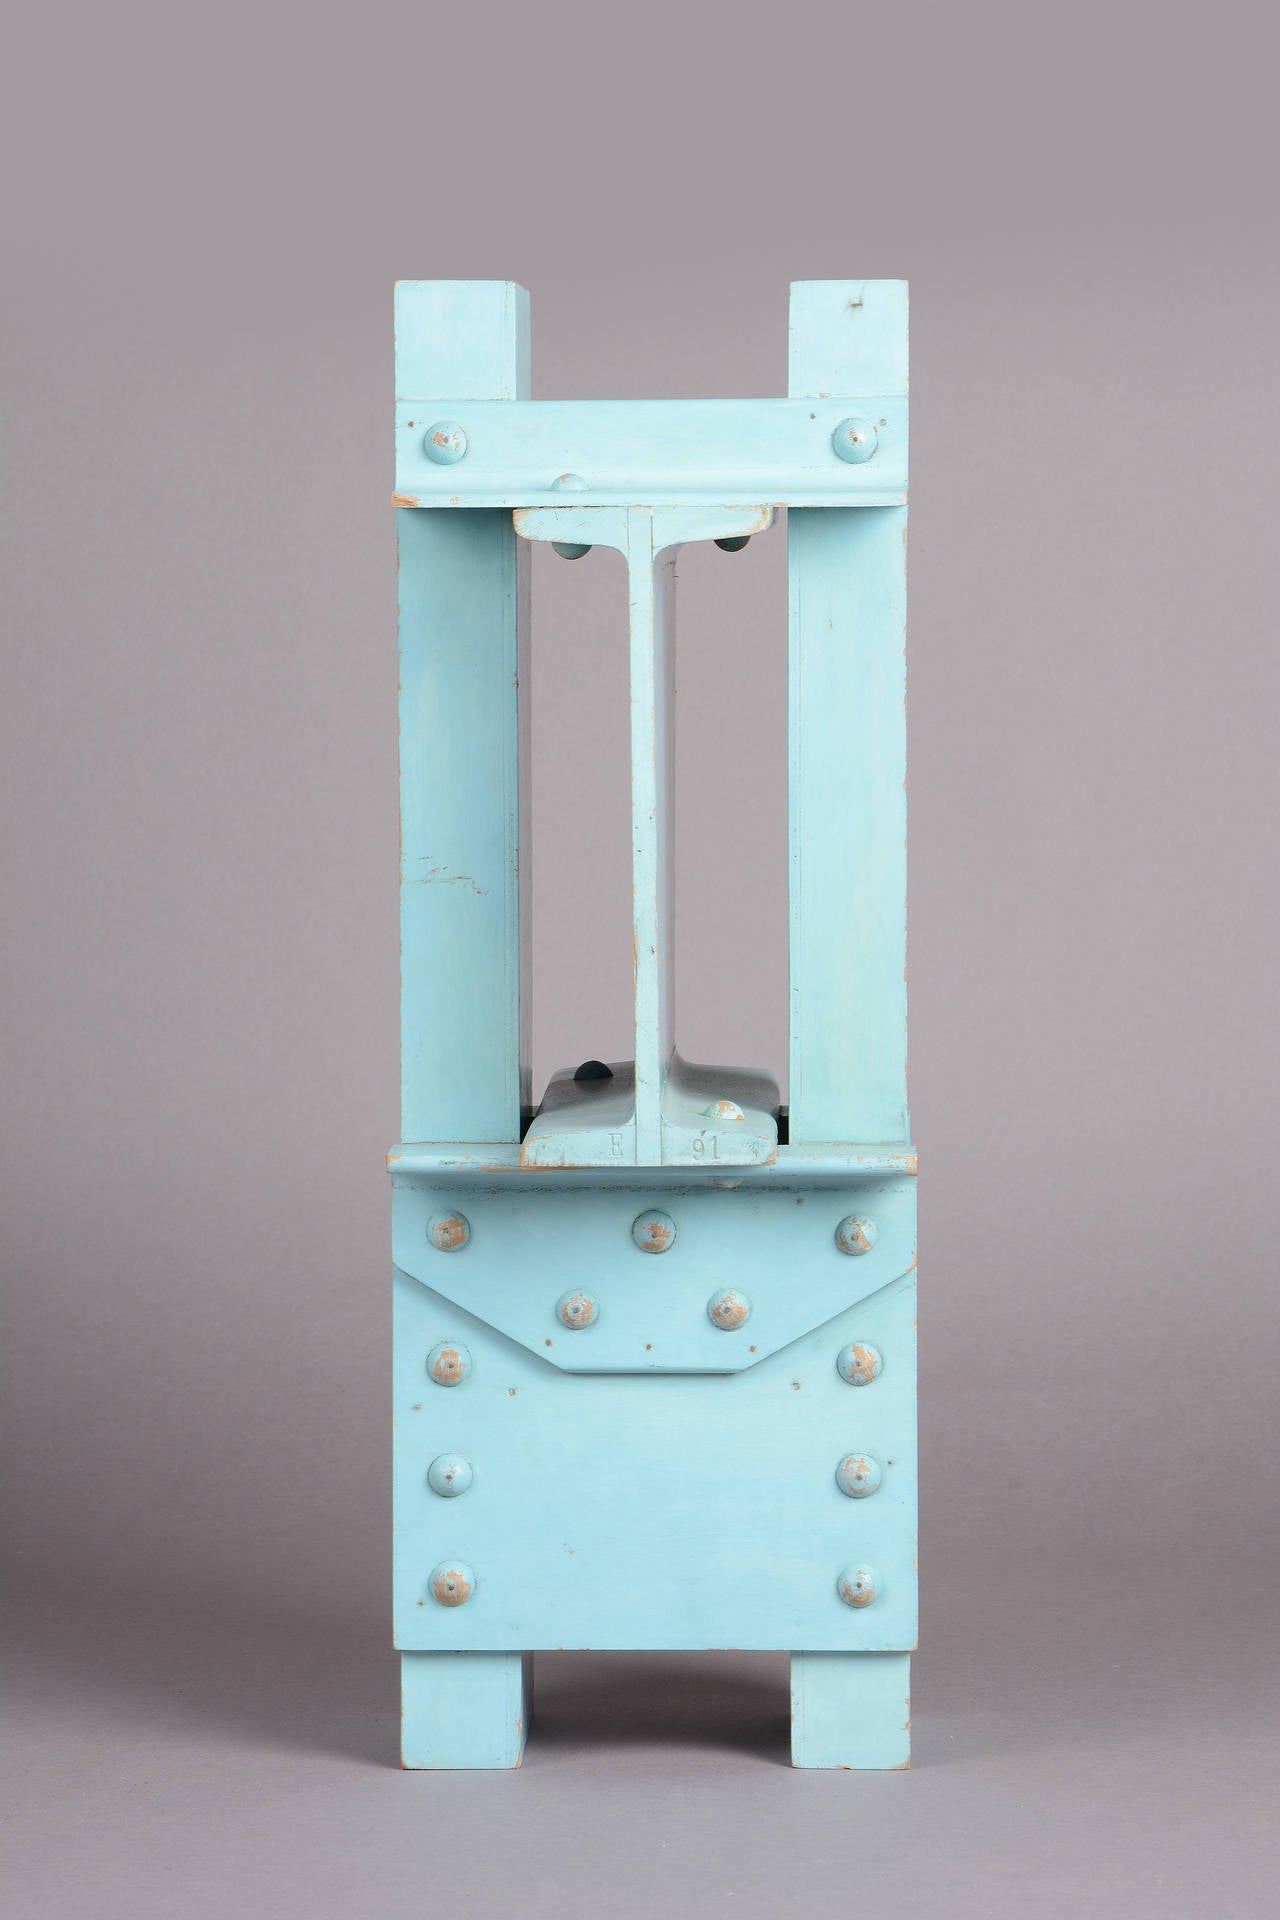 The painted balsa wood model reproduces a bearing connection for columns.
Labeled with an old inventory number on the front, it was most likely used for educational purposes at universities or engineering colleges.